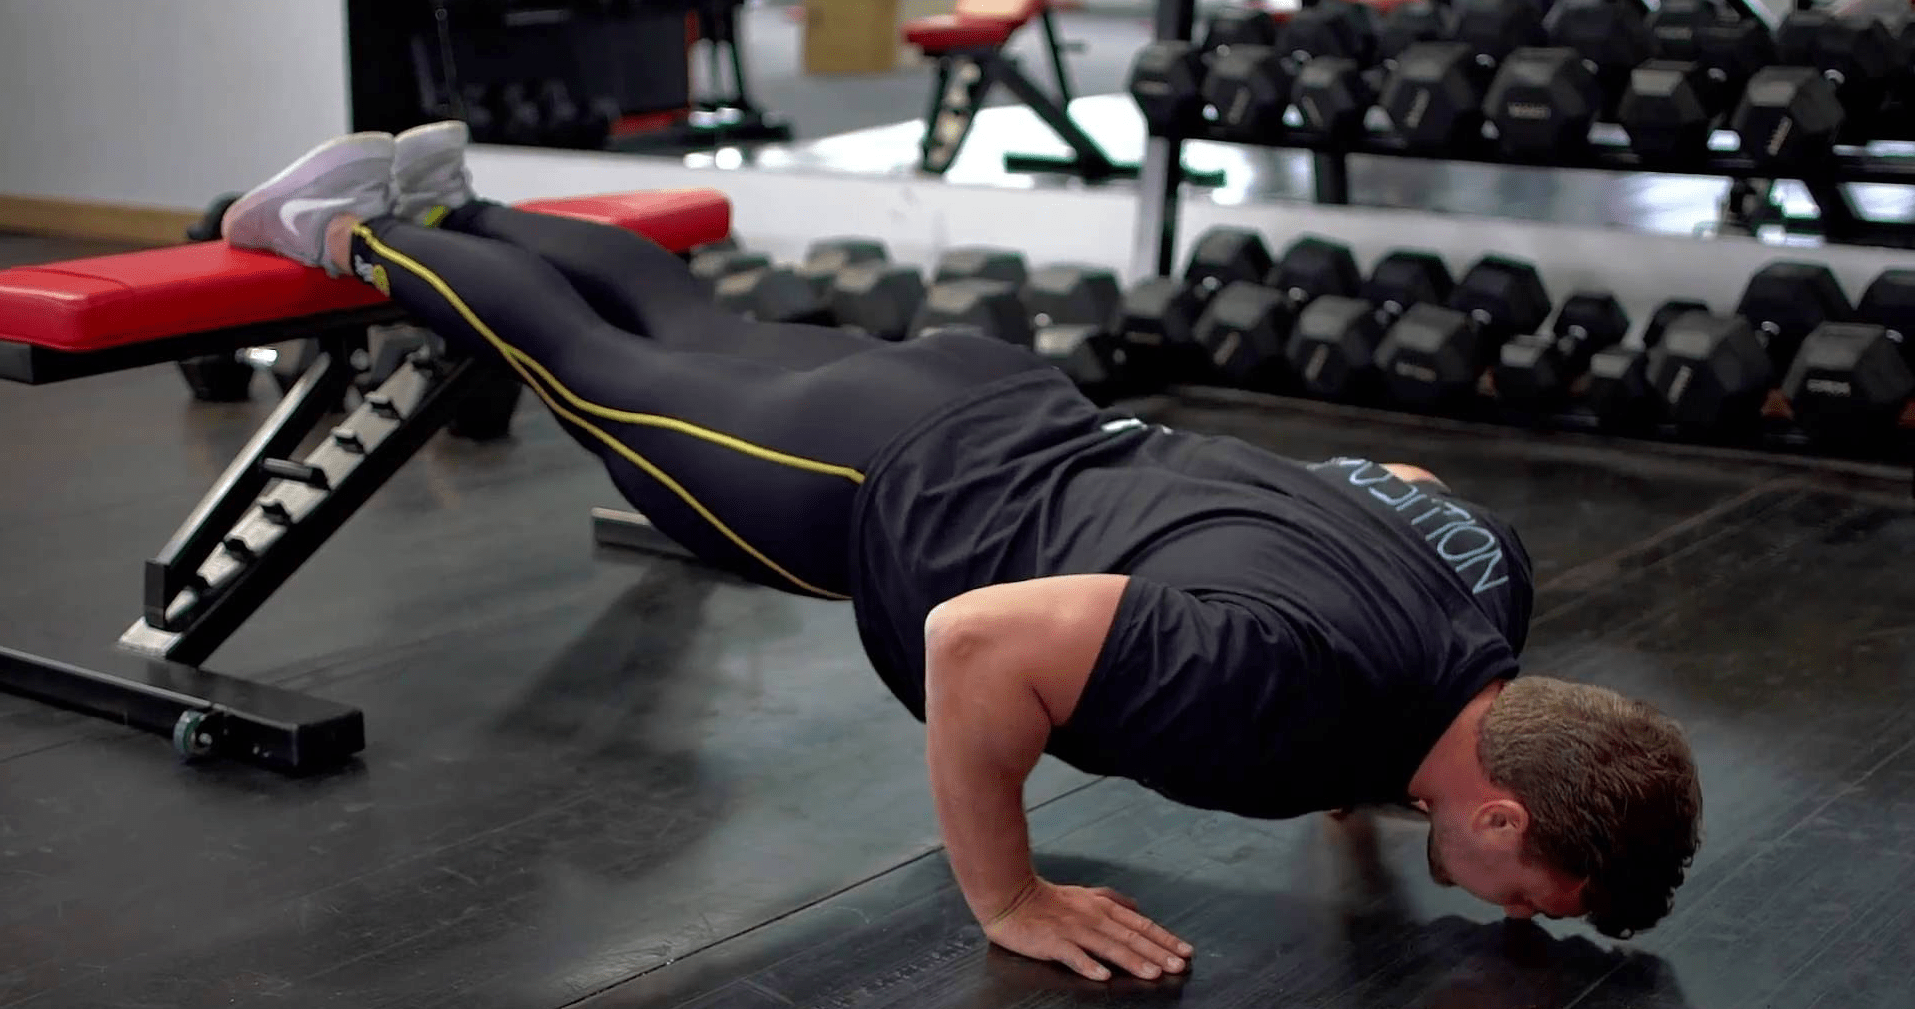 How to Perform Chest workouts without bench 9 exercises